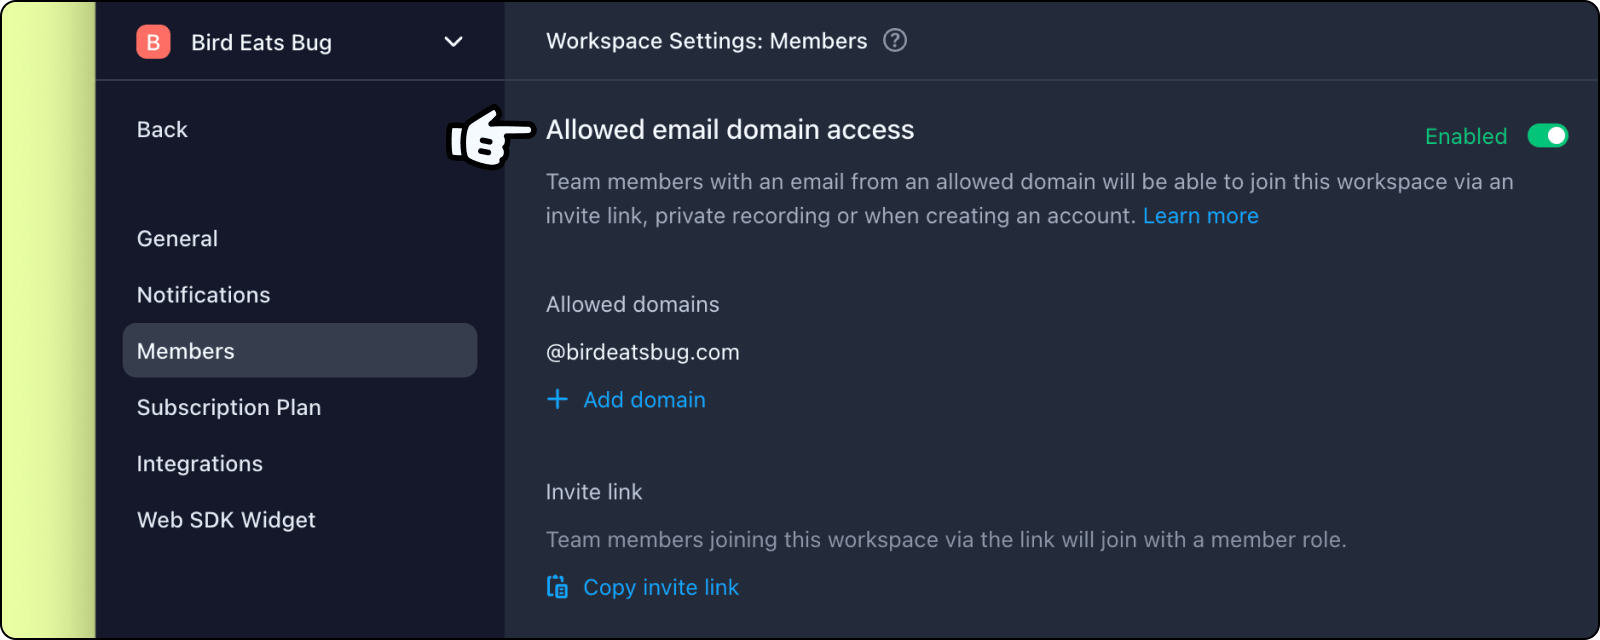 Allowed email domain access